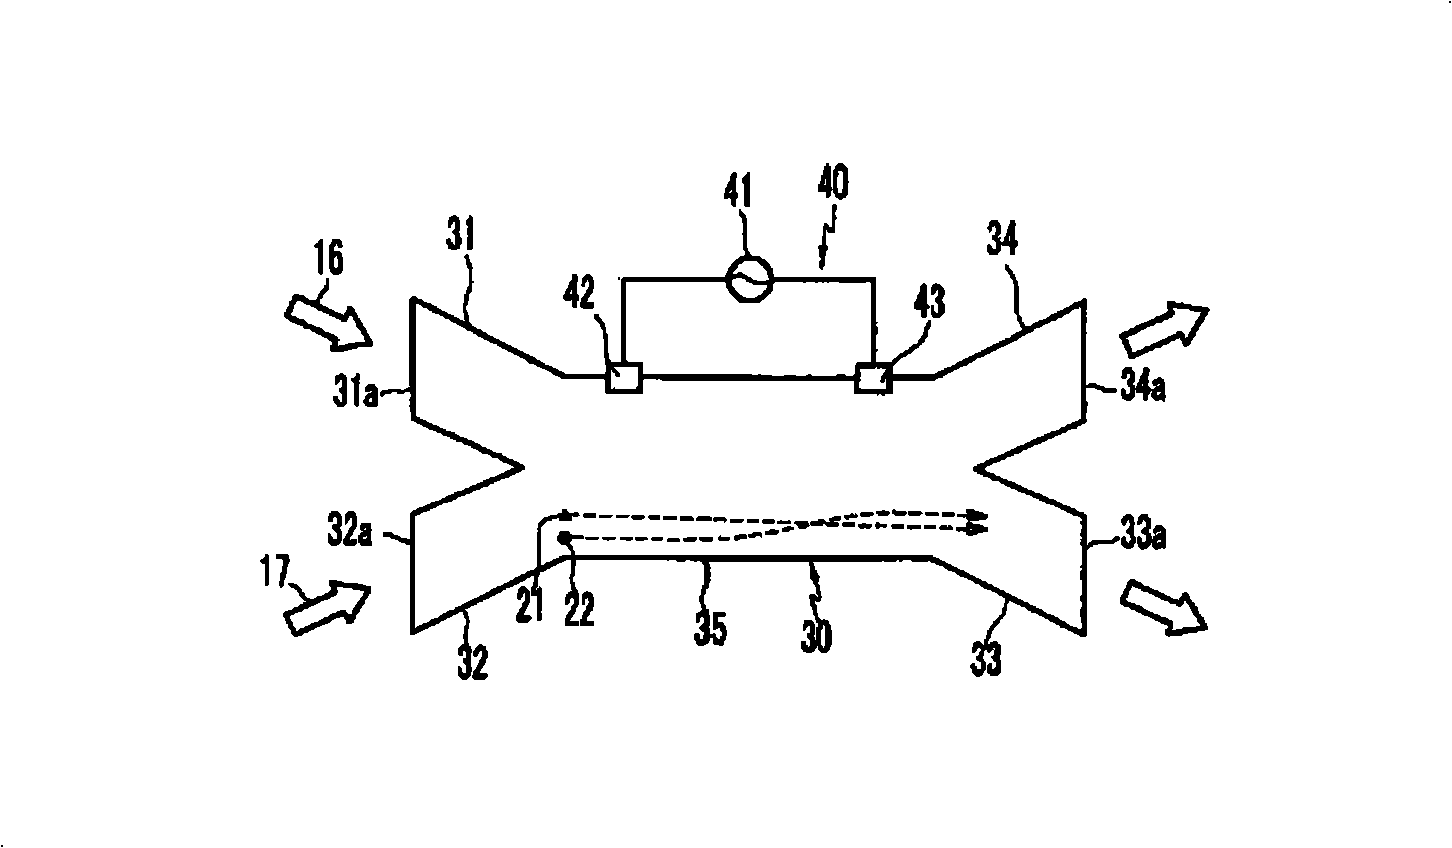 Apparatus and method for separating particles